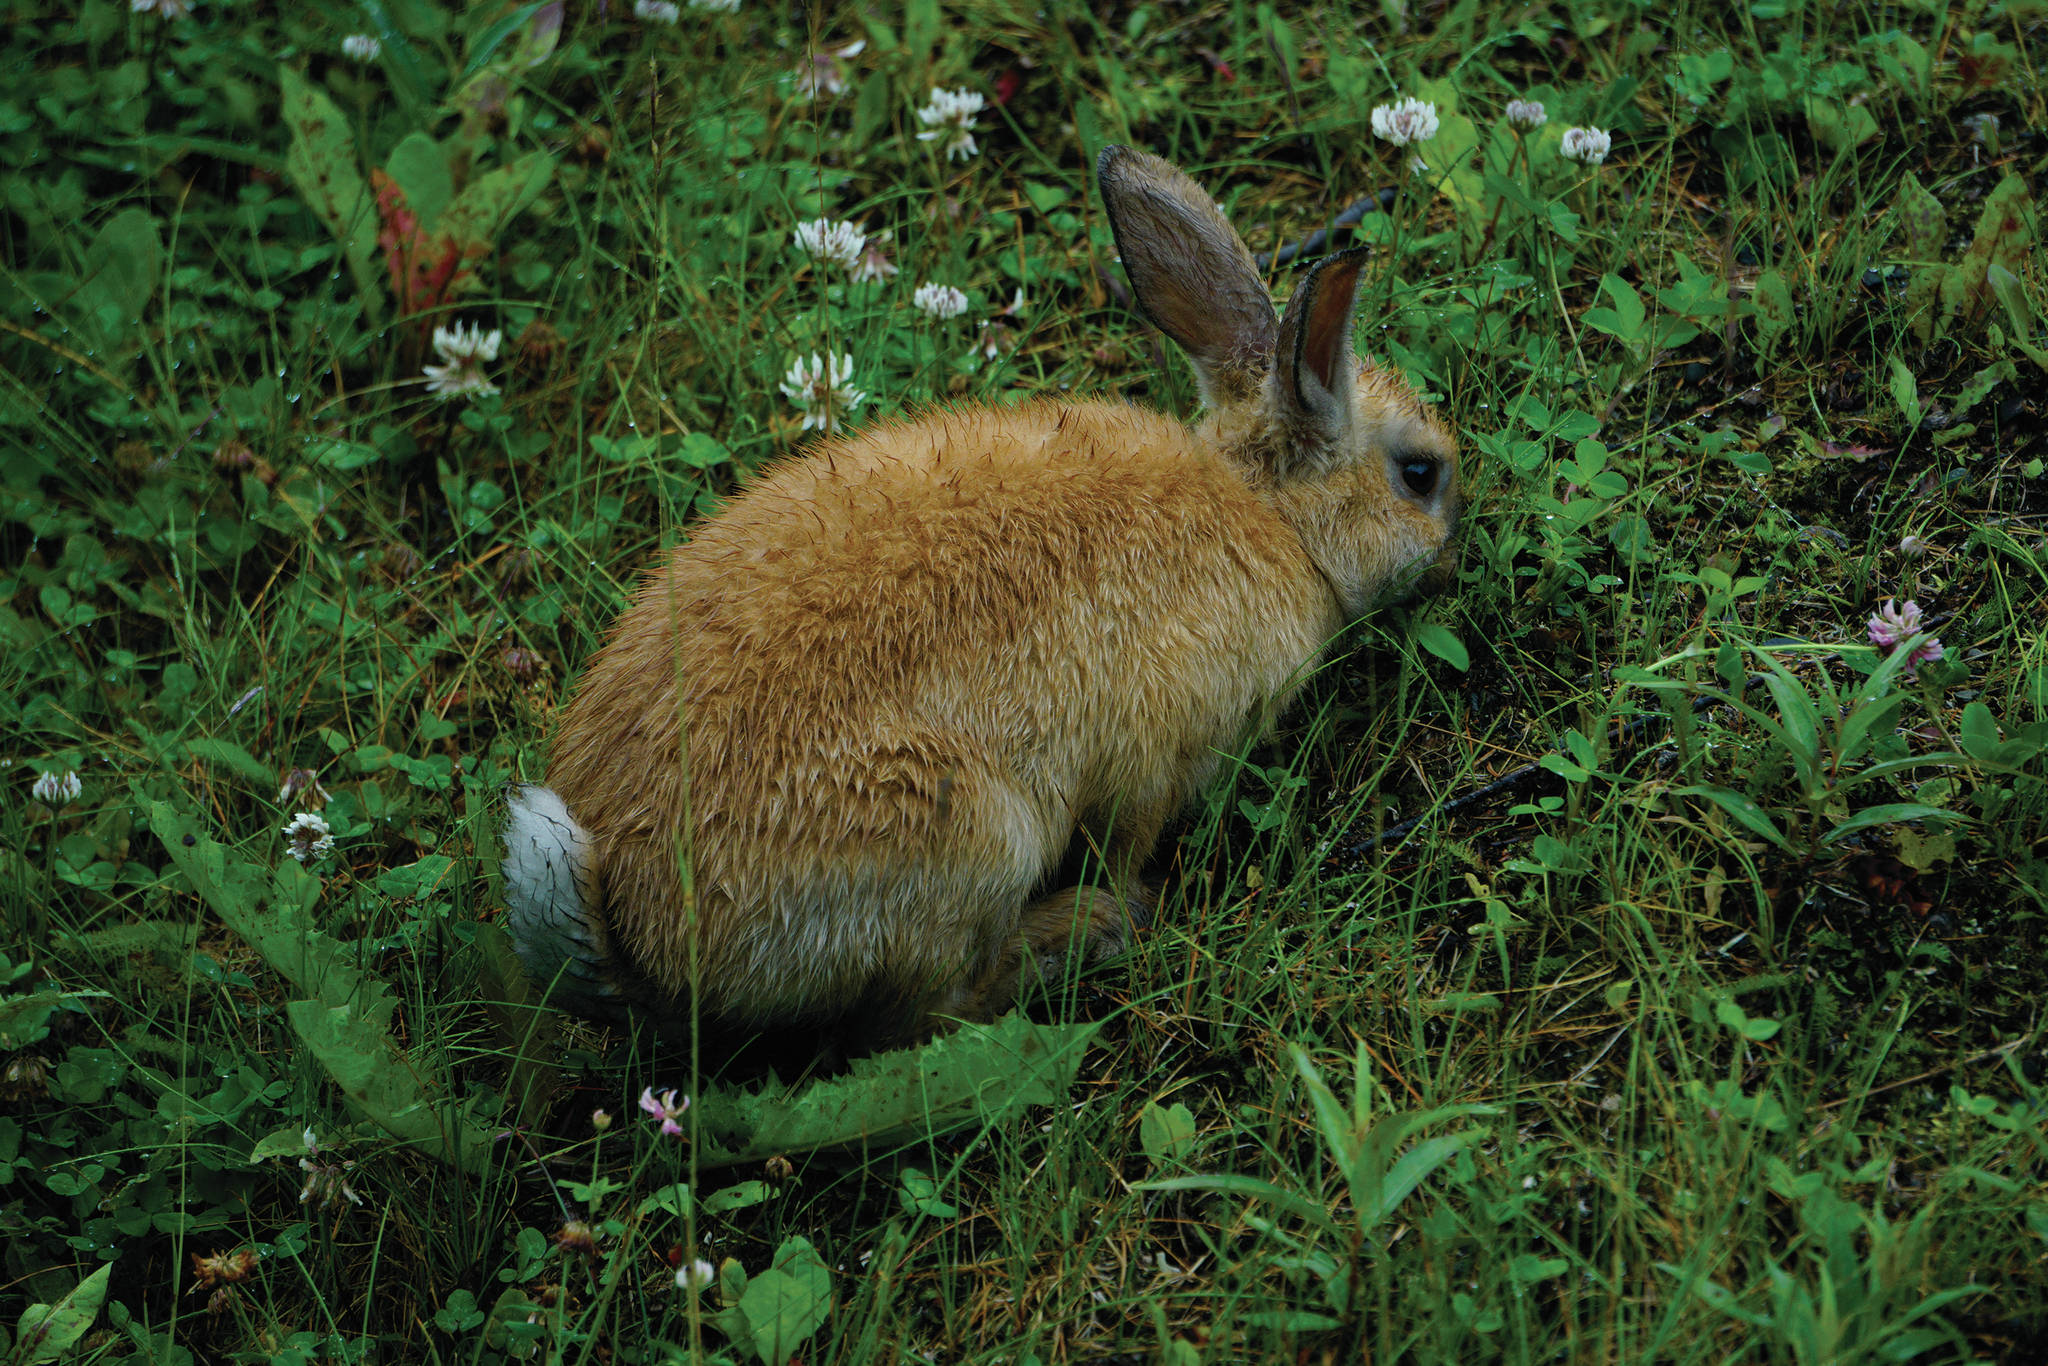 A domestic rabbit feeds on July 20, 2020, in the U.S. Fish and Wildlife Service Hidden Lake Campground near Sterling, Alaska. It’s unknown how the rabbit wound up in the campground. (Photo by Michael Armstrong/Homer News).